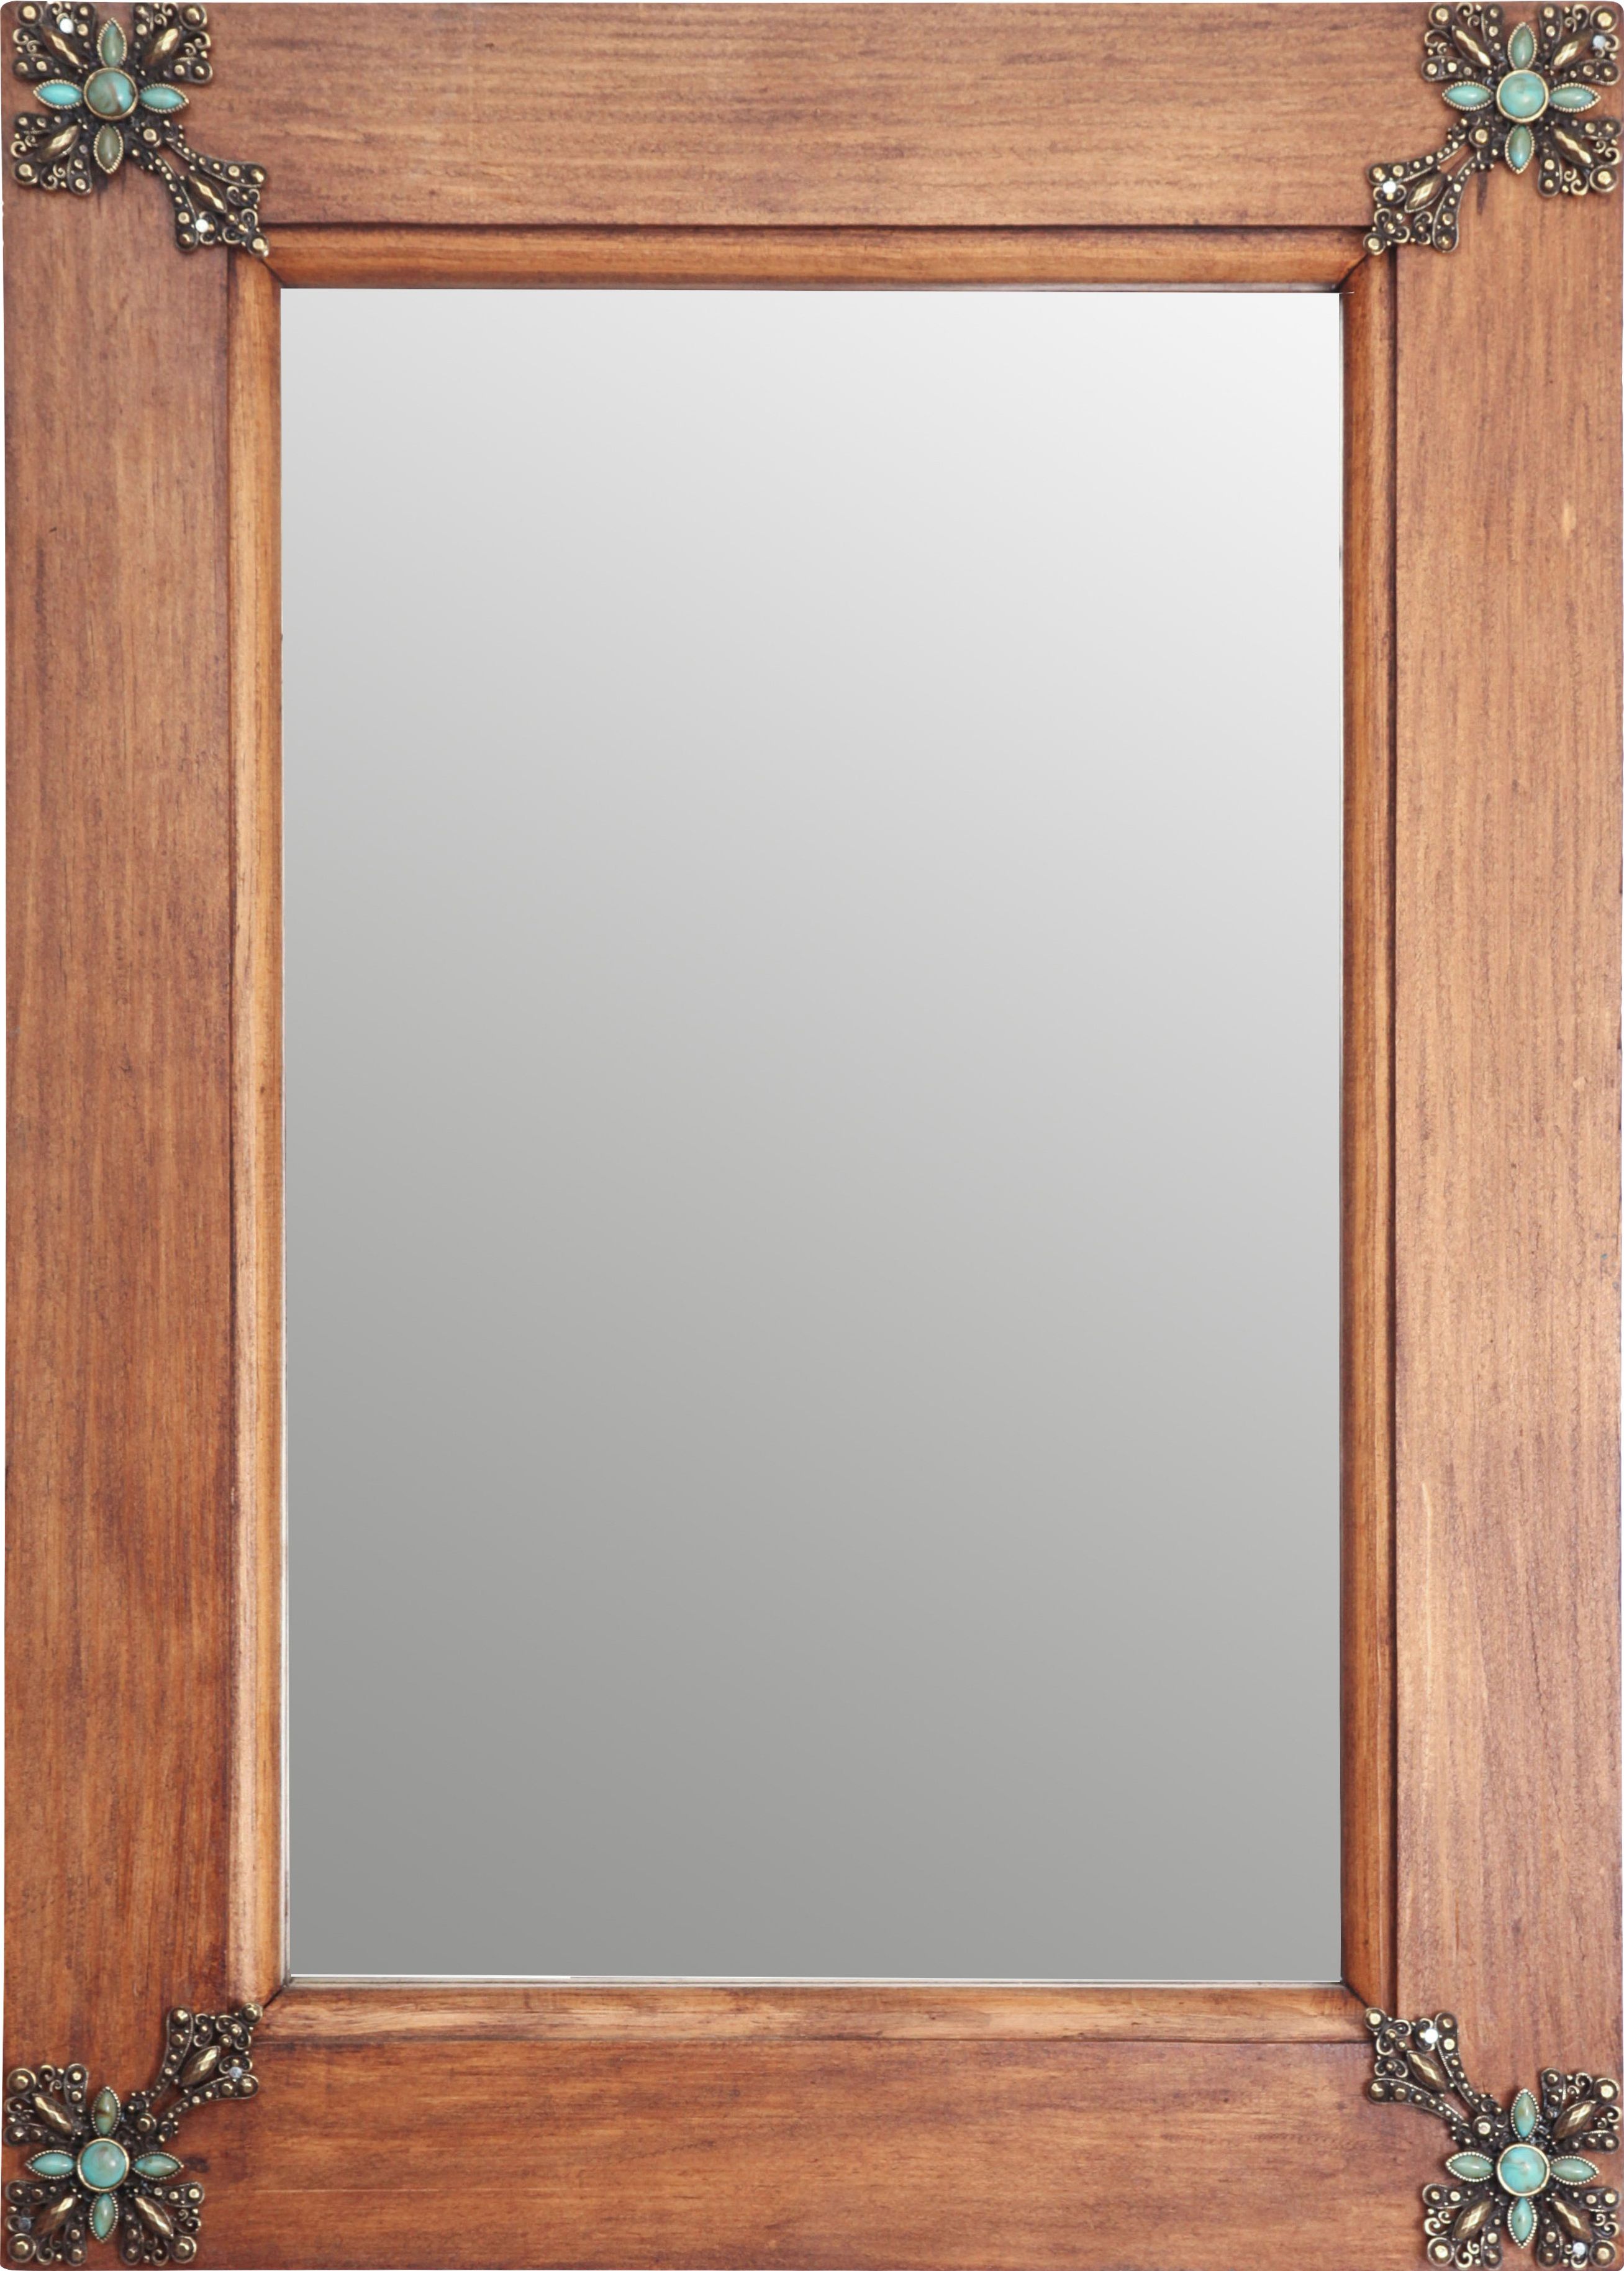 Concho Cross Rustic Accent Mirror Pertaining To Preferred Lajoie Rustic Accent Mirrors (View 10 of 20)